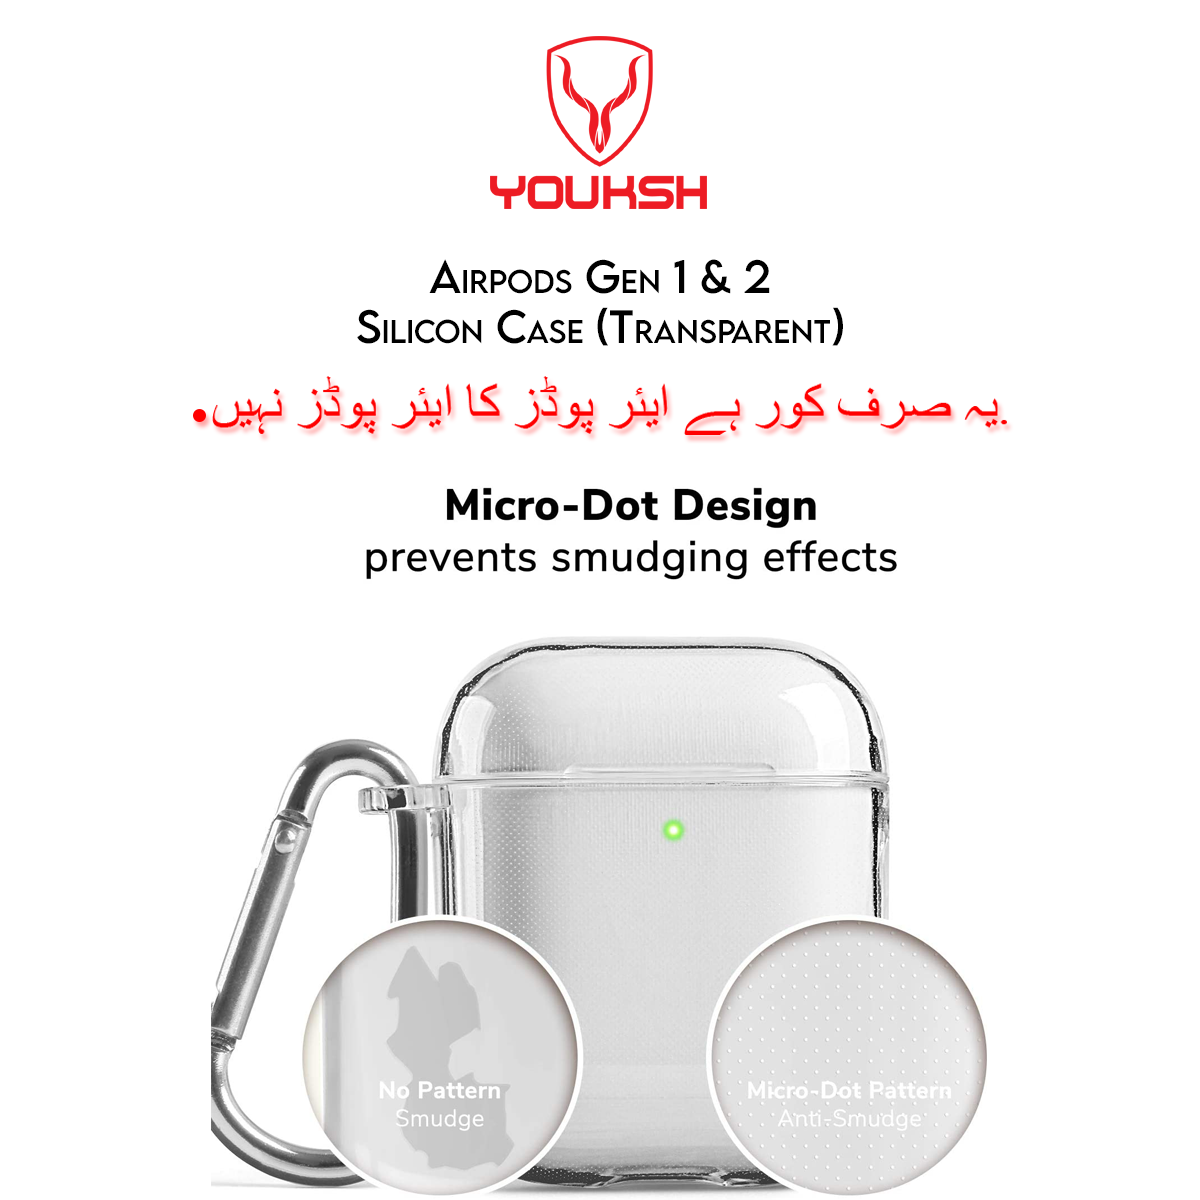 YOUKSH Airpods (Series 1 & 2) Transparent Case - Airpods (Series 1 & 2) Transparent Silicone Cover - Airpods (Series 1 & 2) High Quality Transparent Case Only.